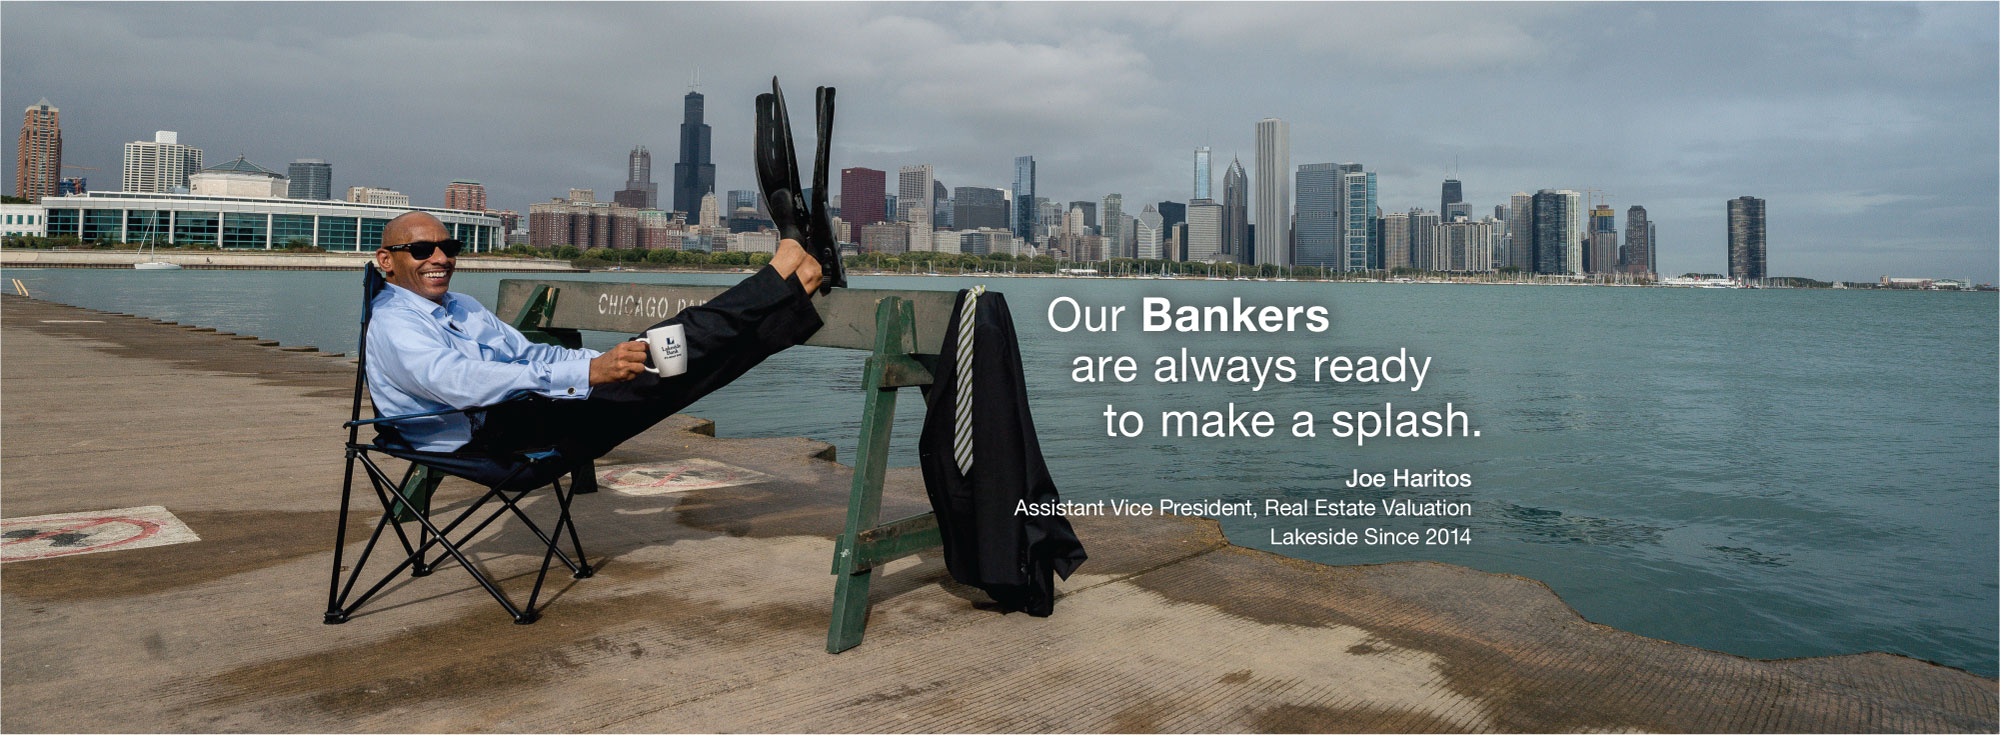 Our bankers are always ready to make a splash